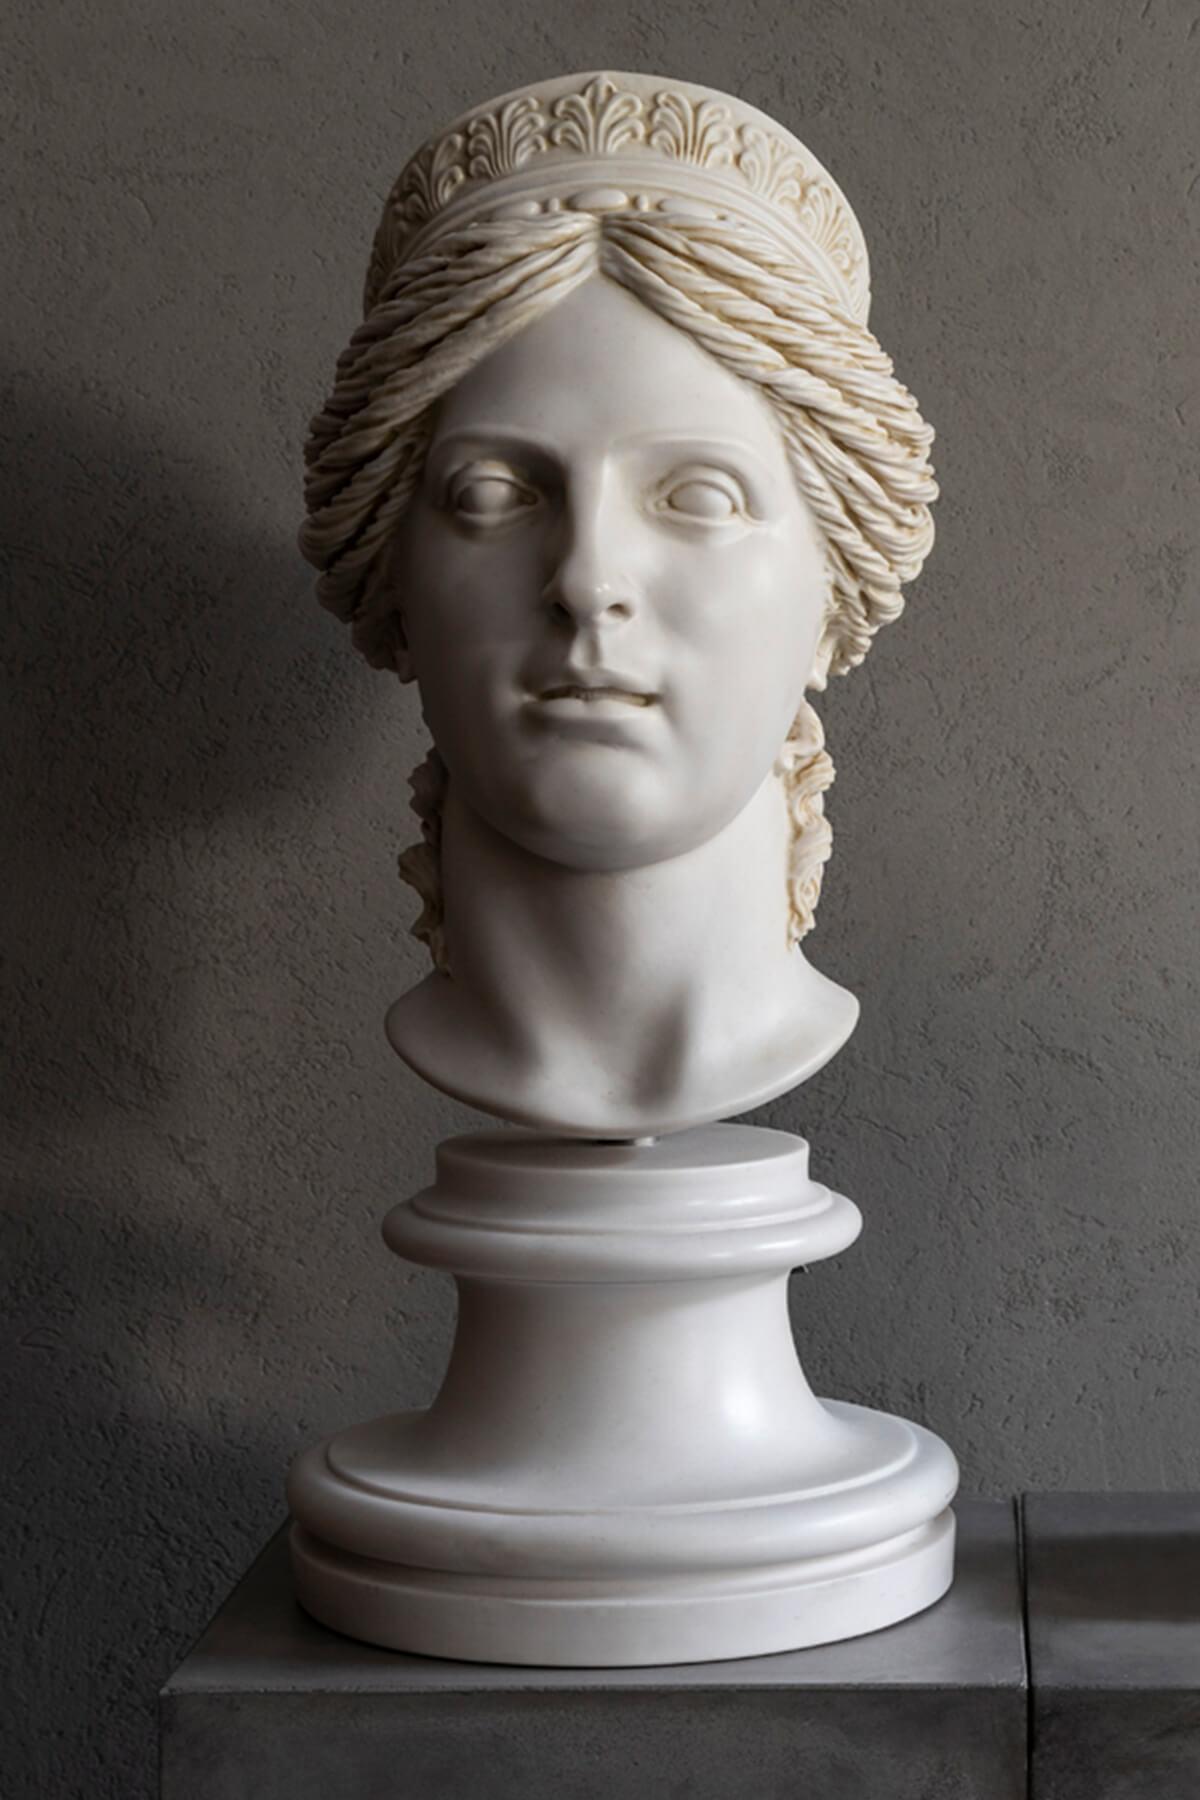 Introducing the exquisite Hera bust, a stunning representation of the powerful and beautiful goddess of marriage, women, birth, and abundance in Greek mythology. This magnificent sculpture is the perfect addition to your home or office, showcasing